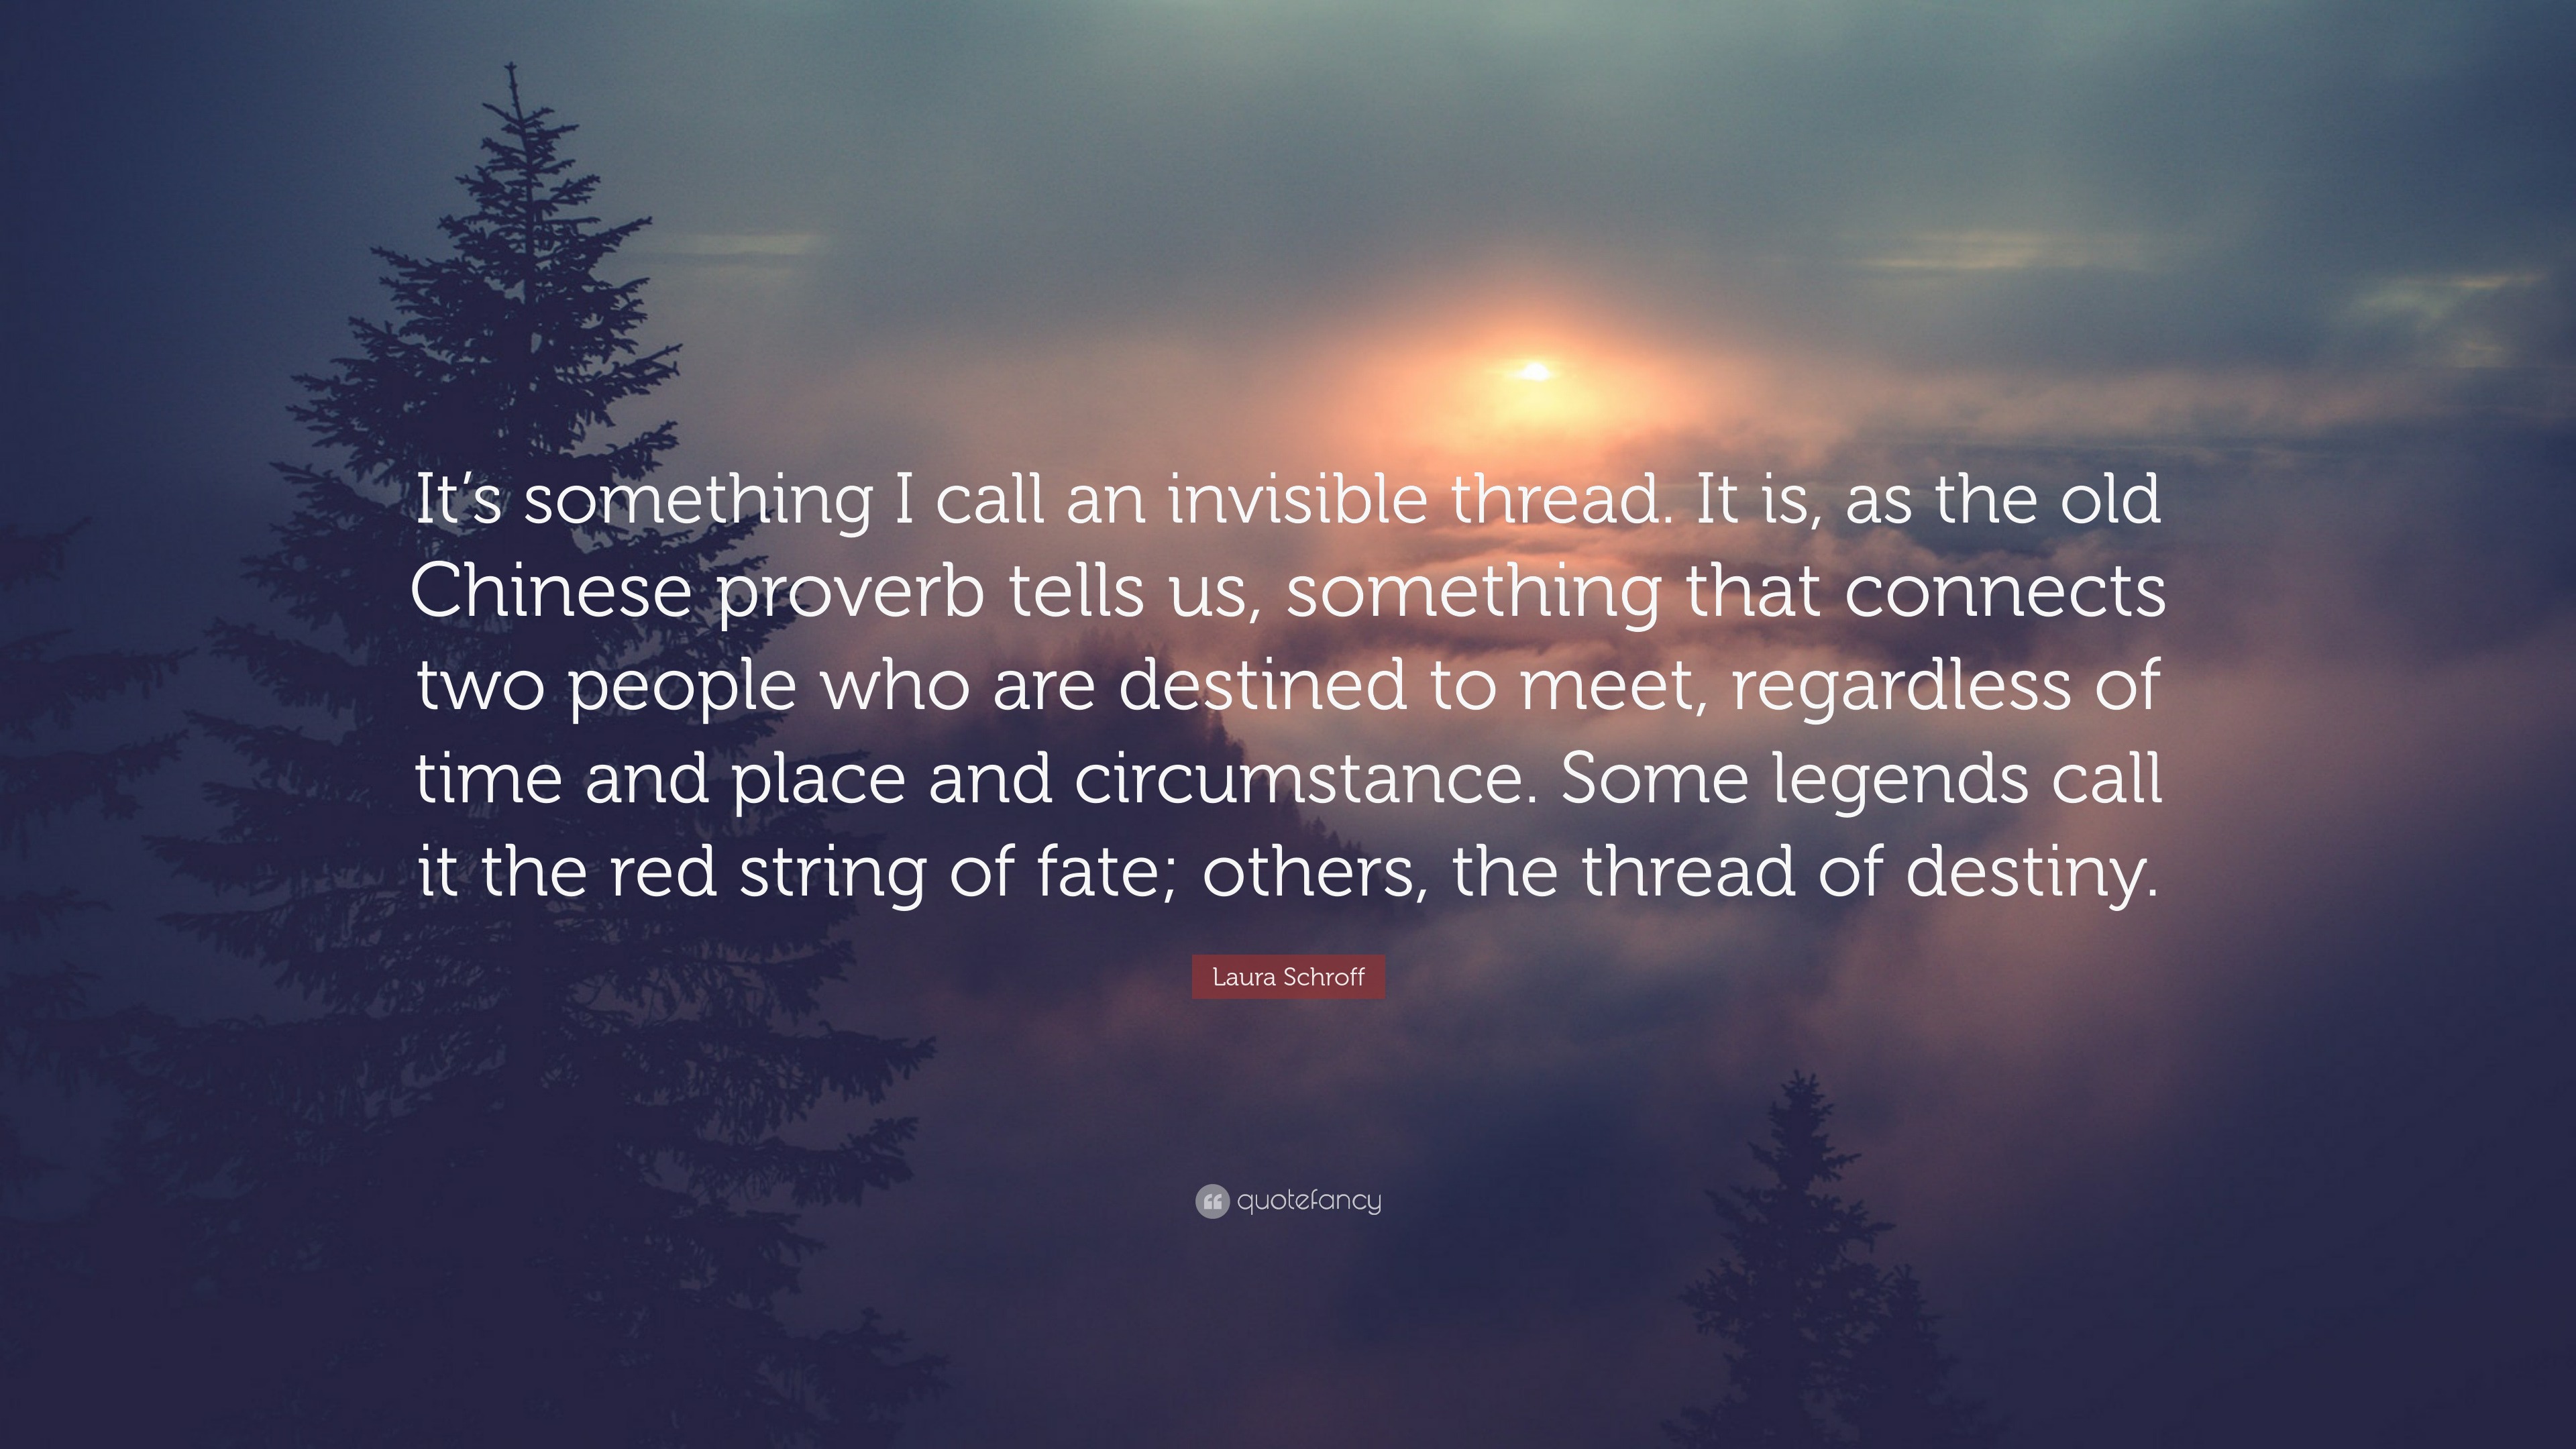 Laura Schroff Quote: “It's something I call an invisible thread